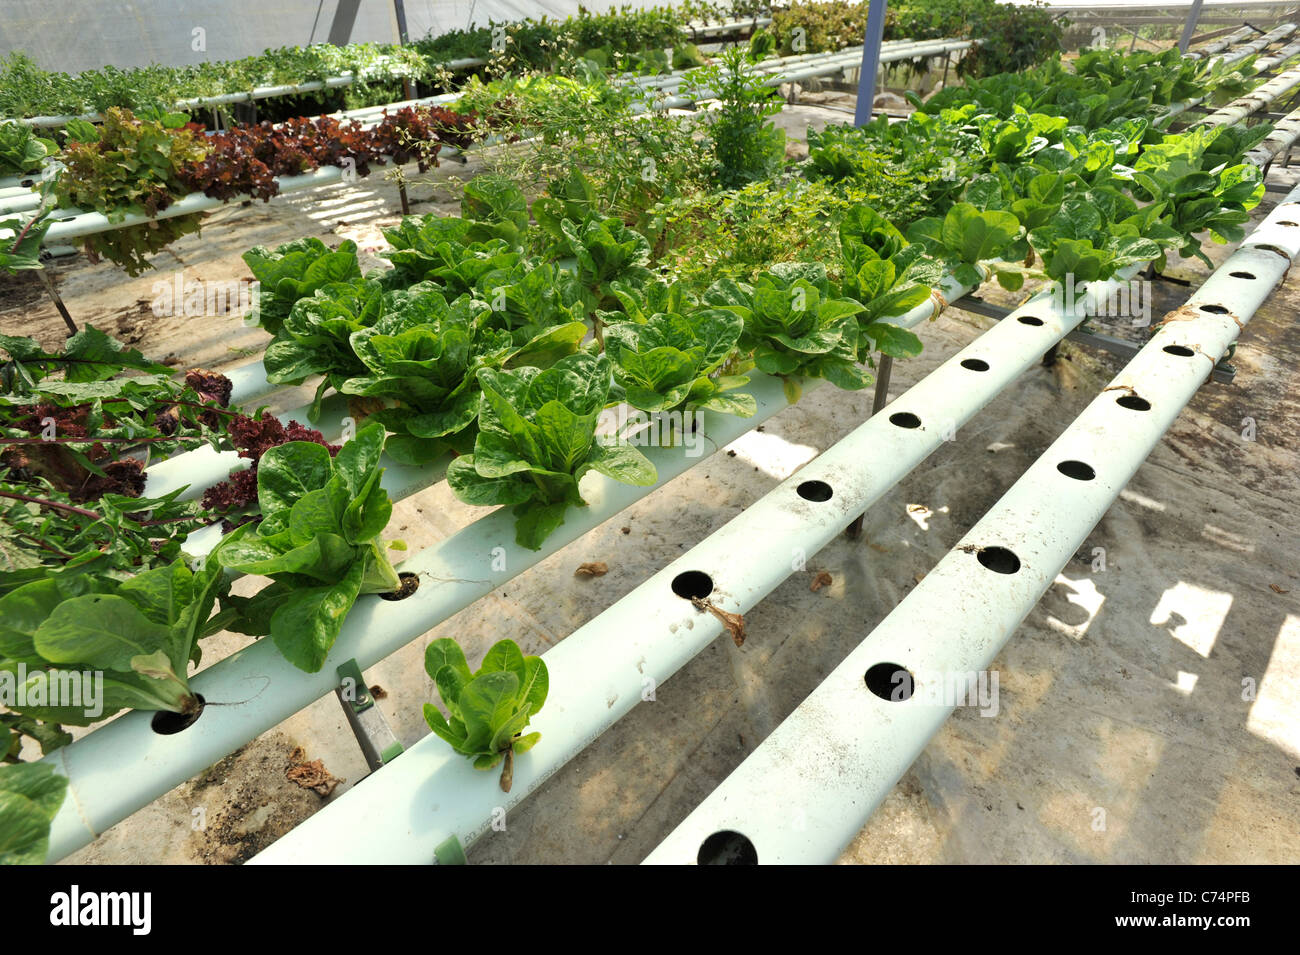 A Hydroponic Garden producing leafy green vegetables in the Currumbin Valley Queensland Australia Stock Photo